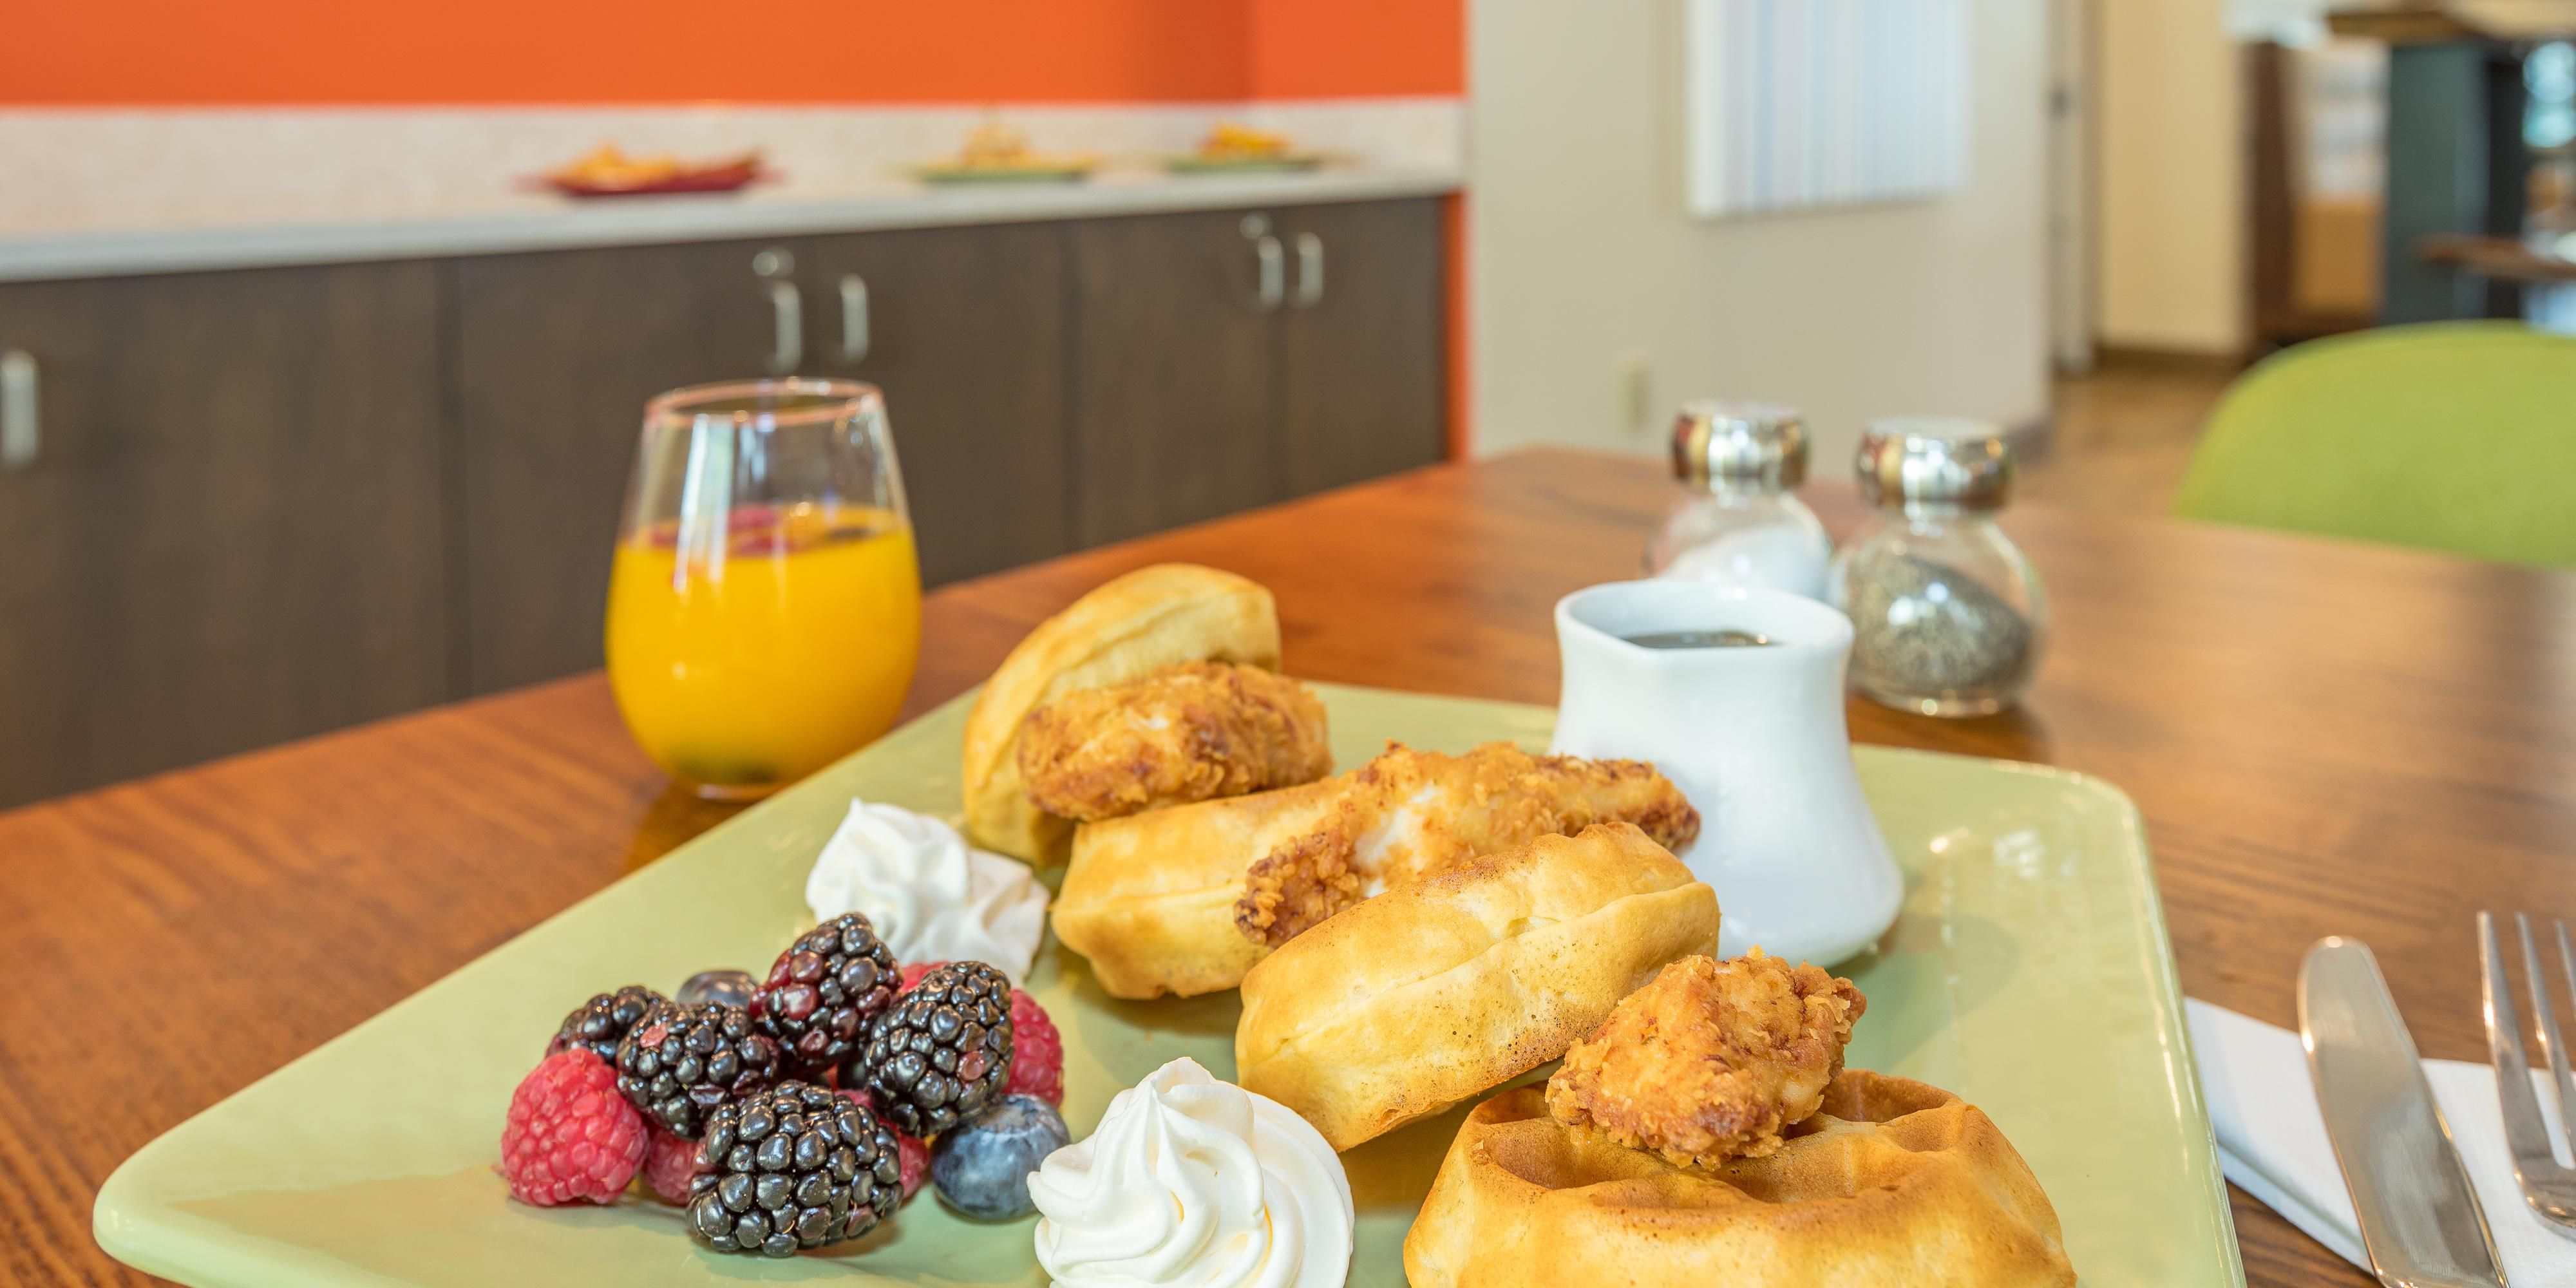 Energize yourself with crispy chicken and waffles